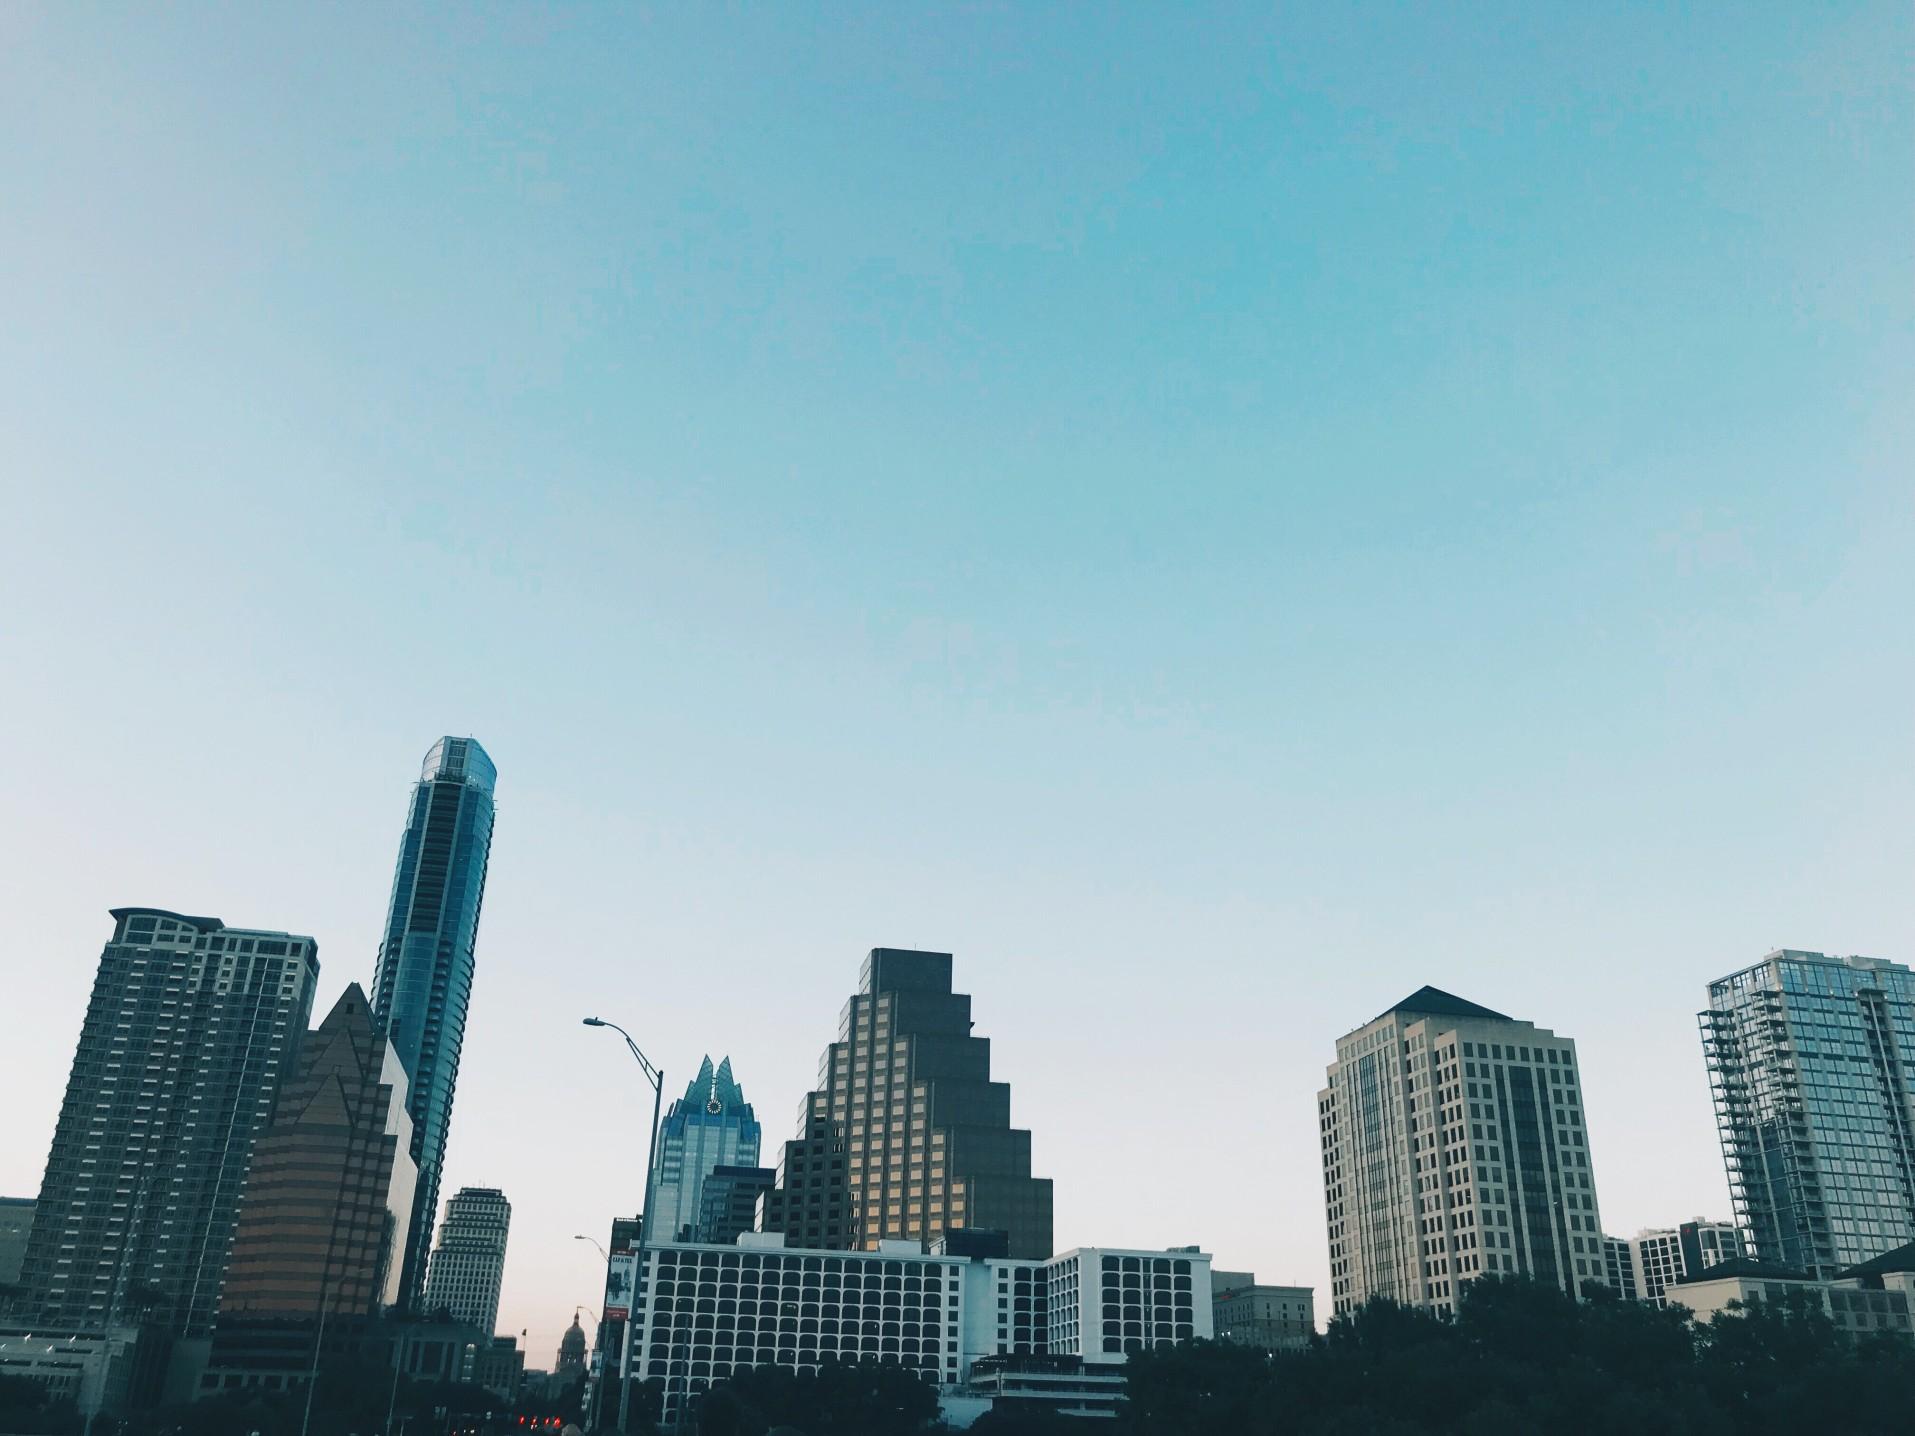 Since the start of the COVID-19 pandemic, Austin has seen a dramatic increase in population.